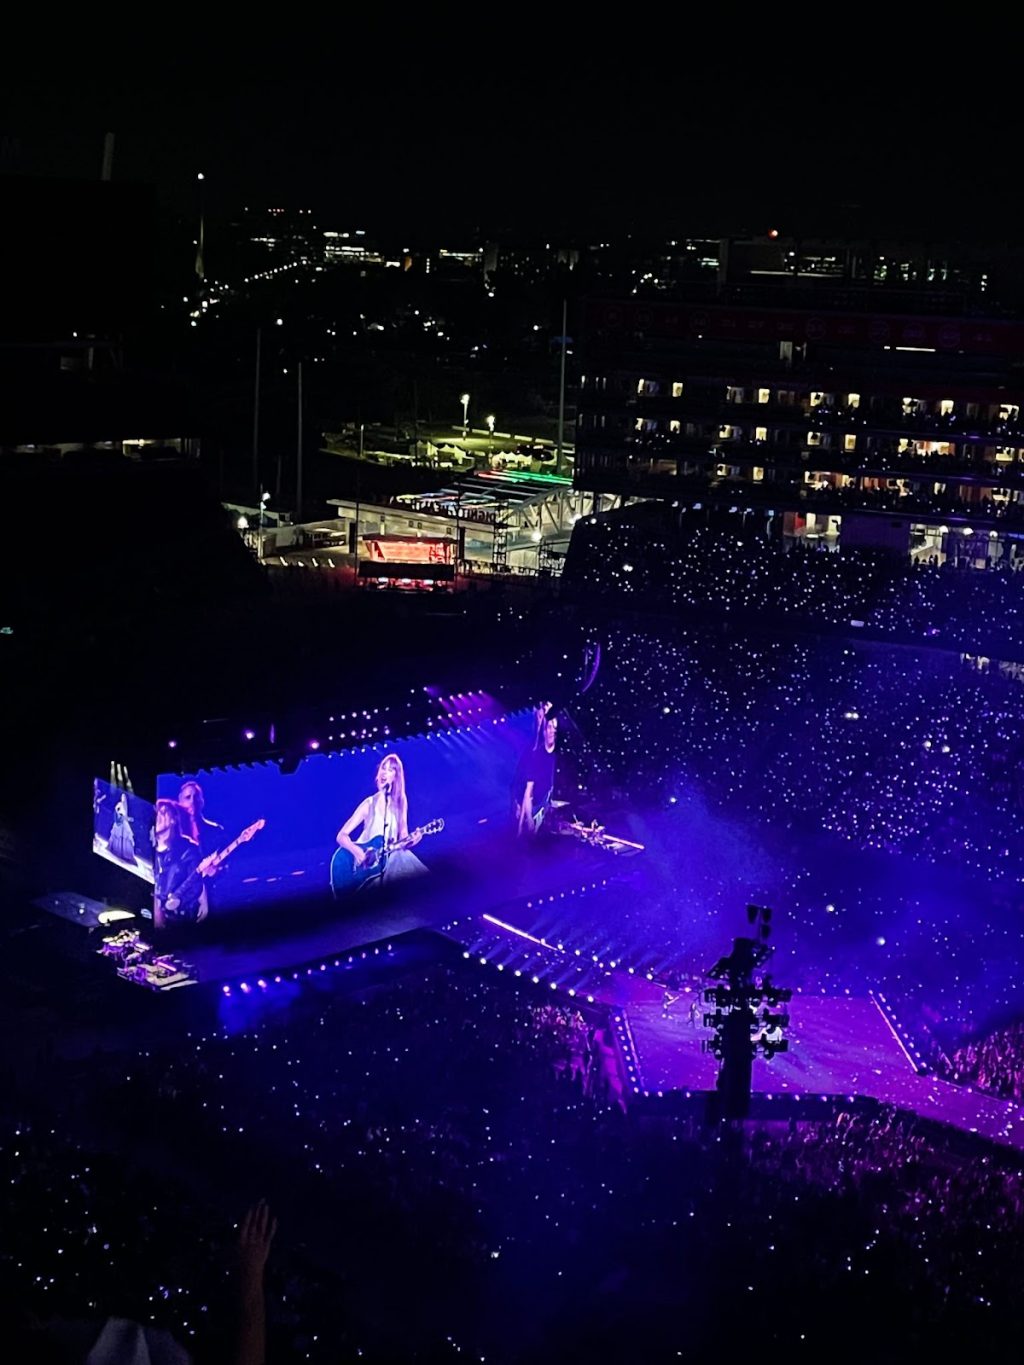 Senior Nathania Au snapped a picture of Swift performing "Long Live" at Levi&squot;s Stadium in Santa Clara in July. The song is an ode to her band and fans, according to an old blog post of Swift&squot;s. Photo courtesy of Nathania Au